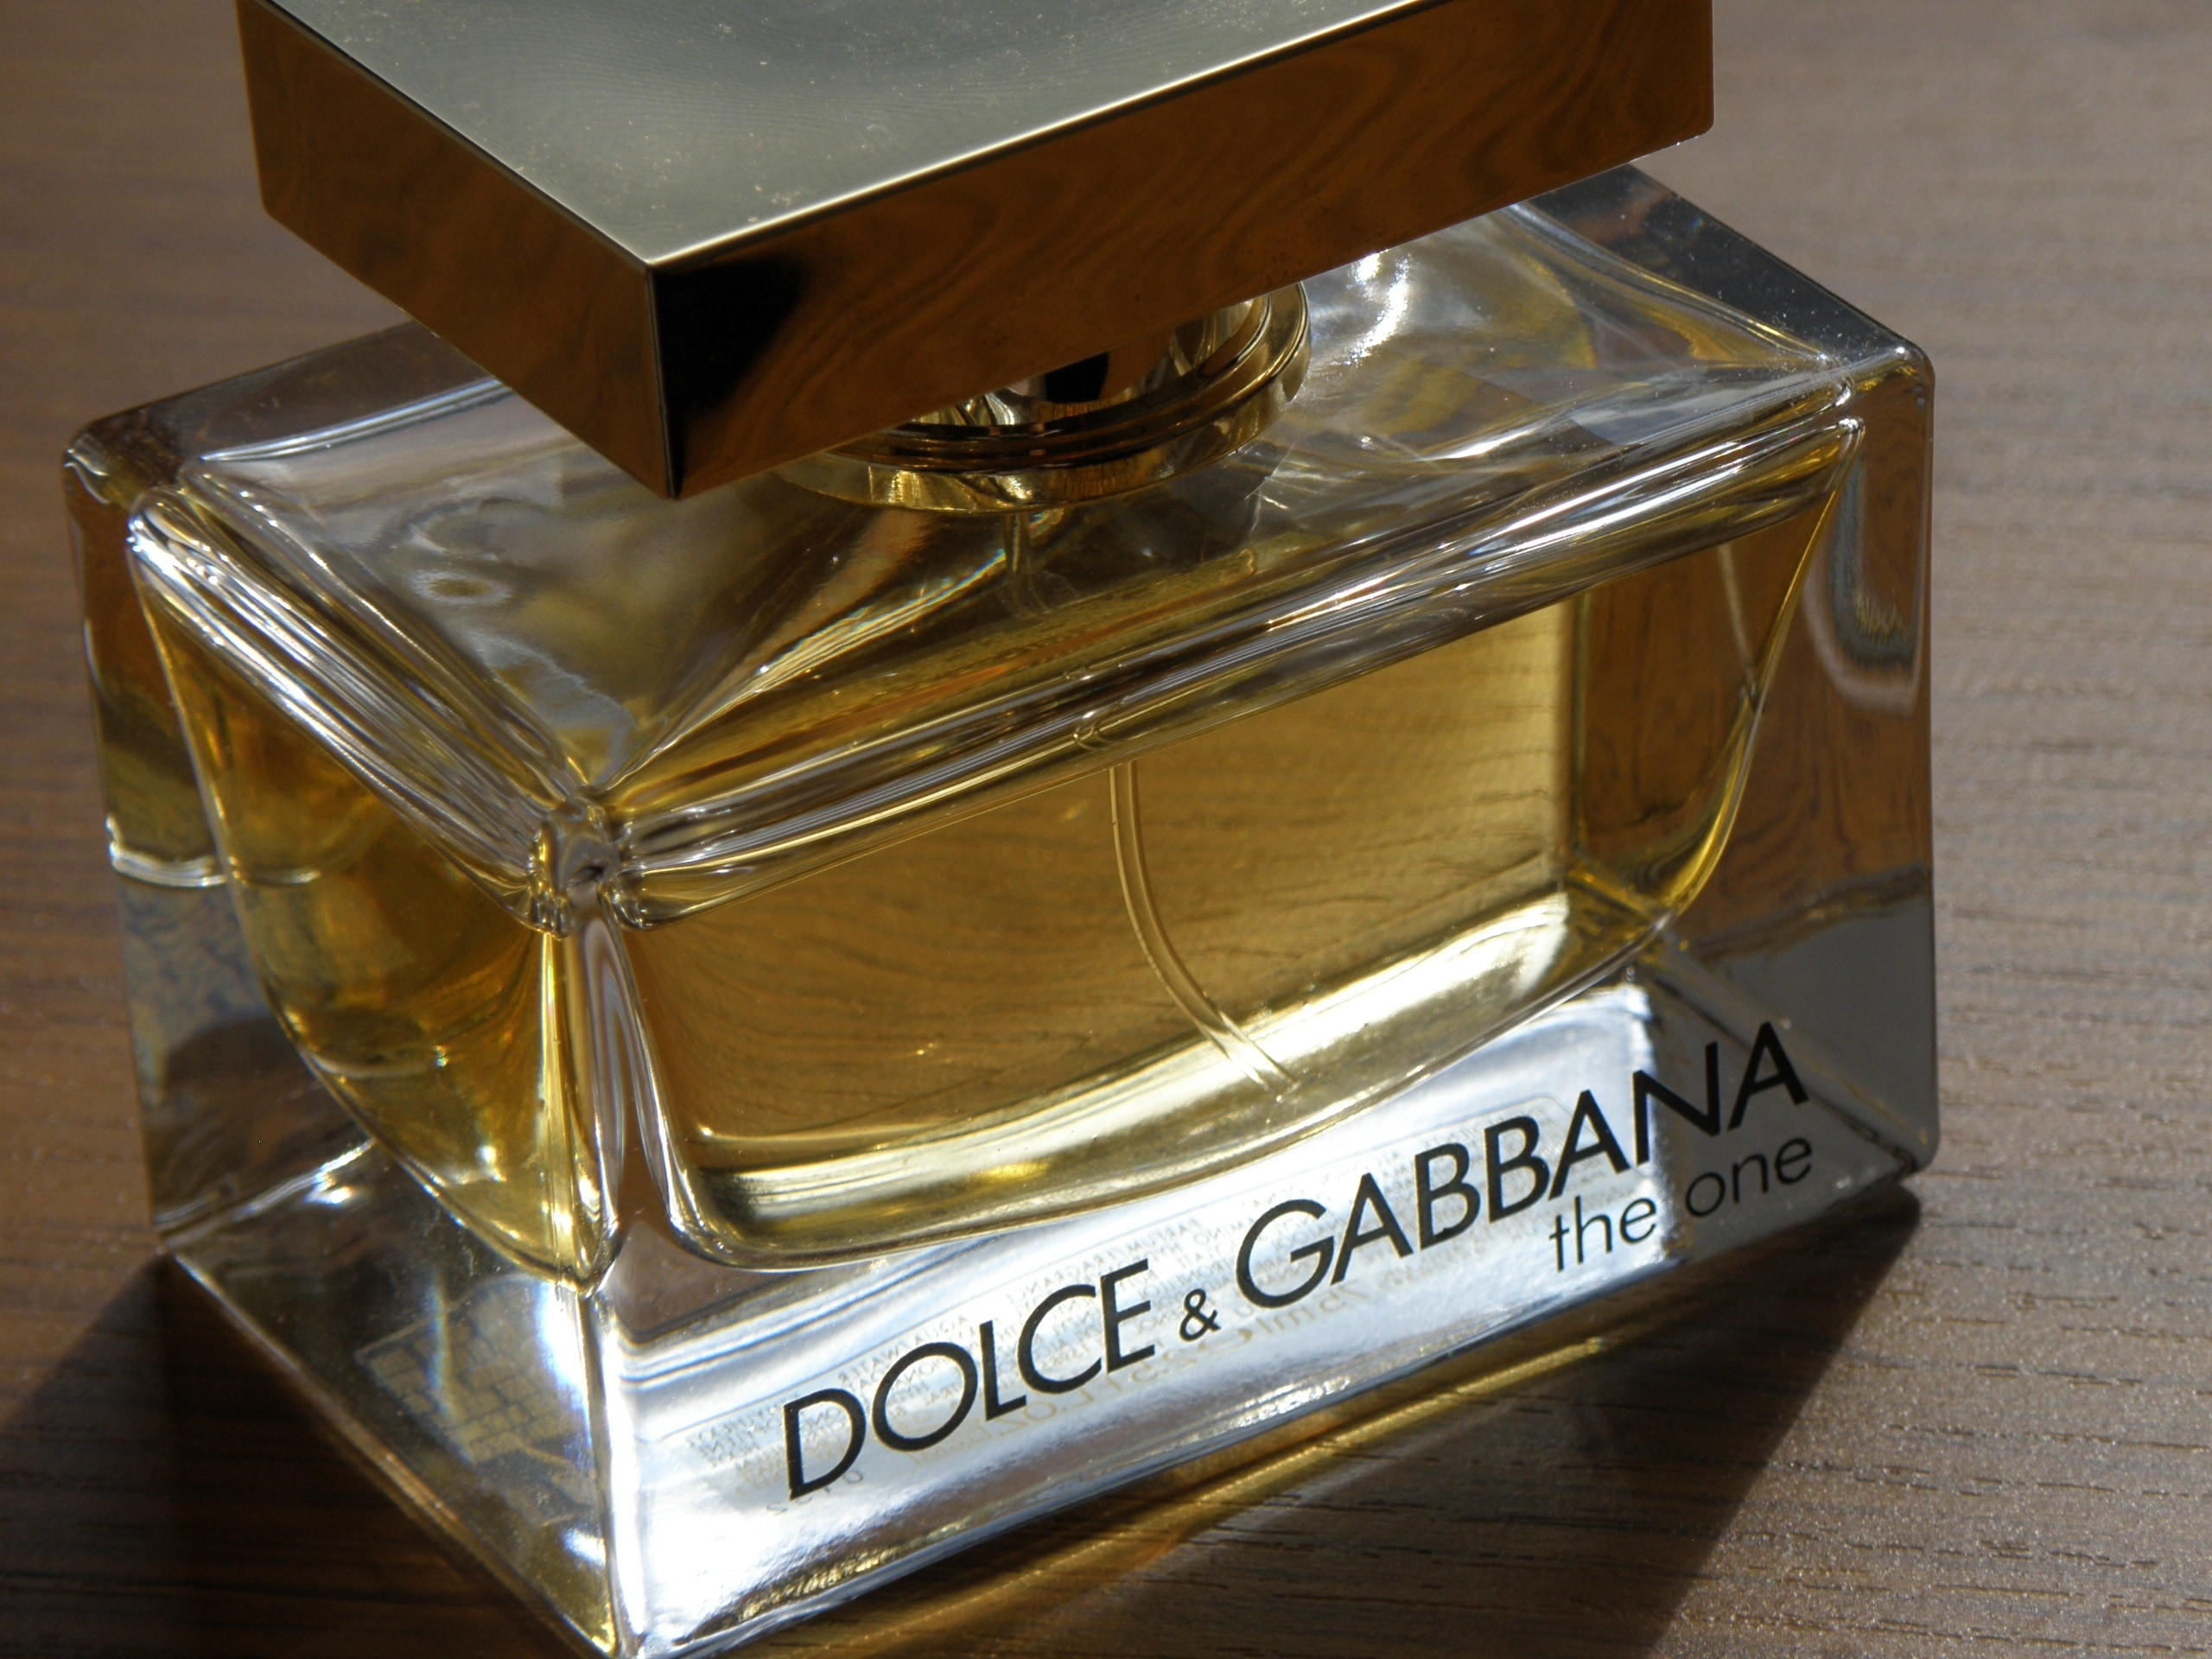 Dolce and Gabbana the one perfume bottle